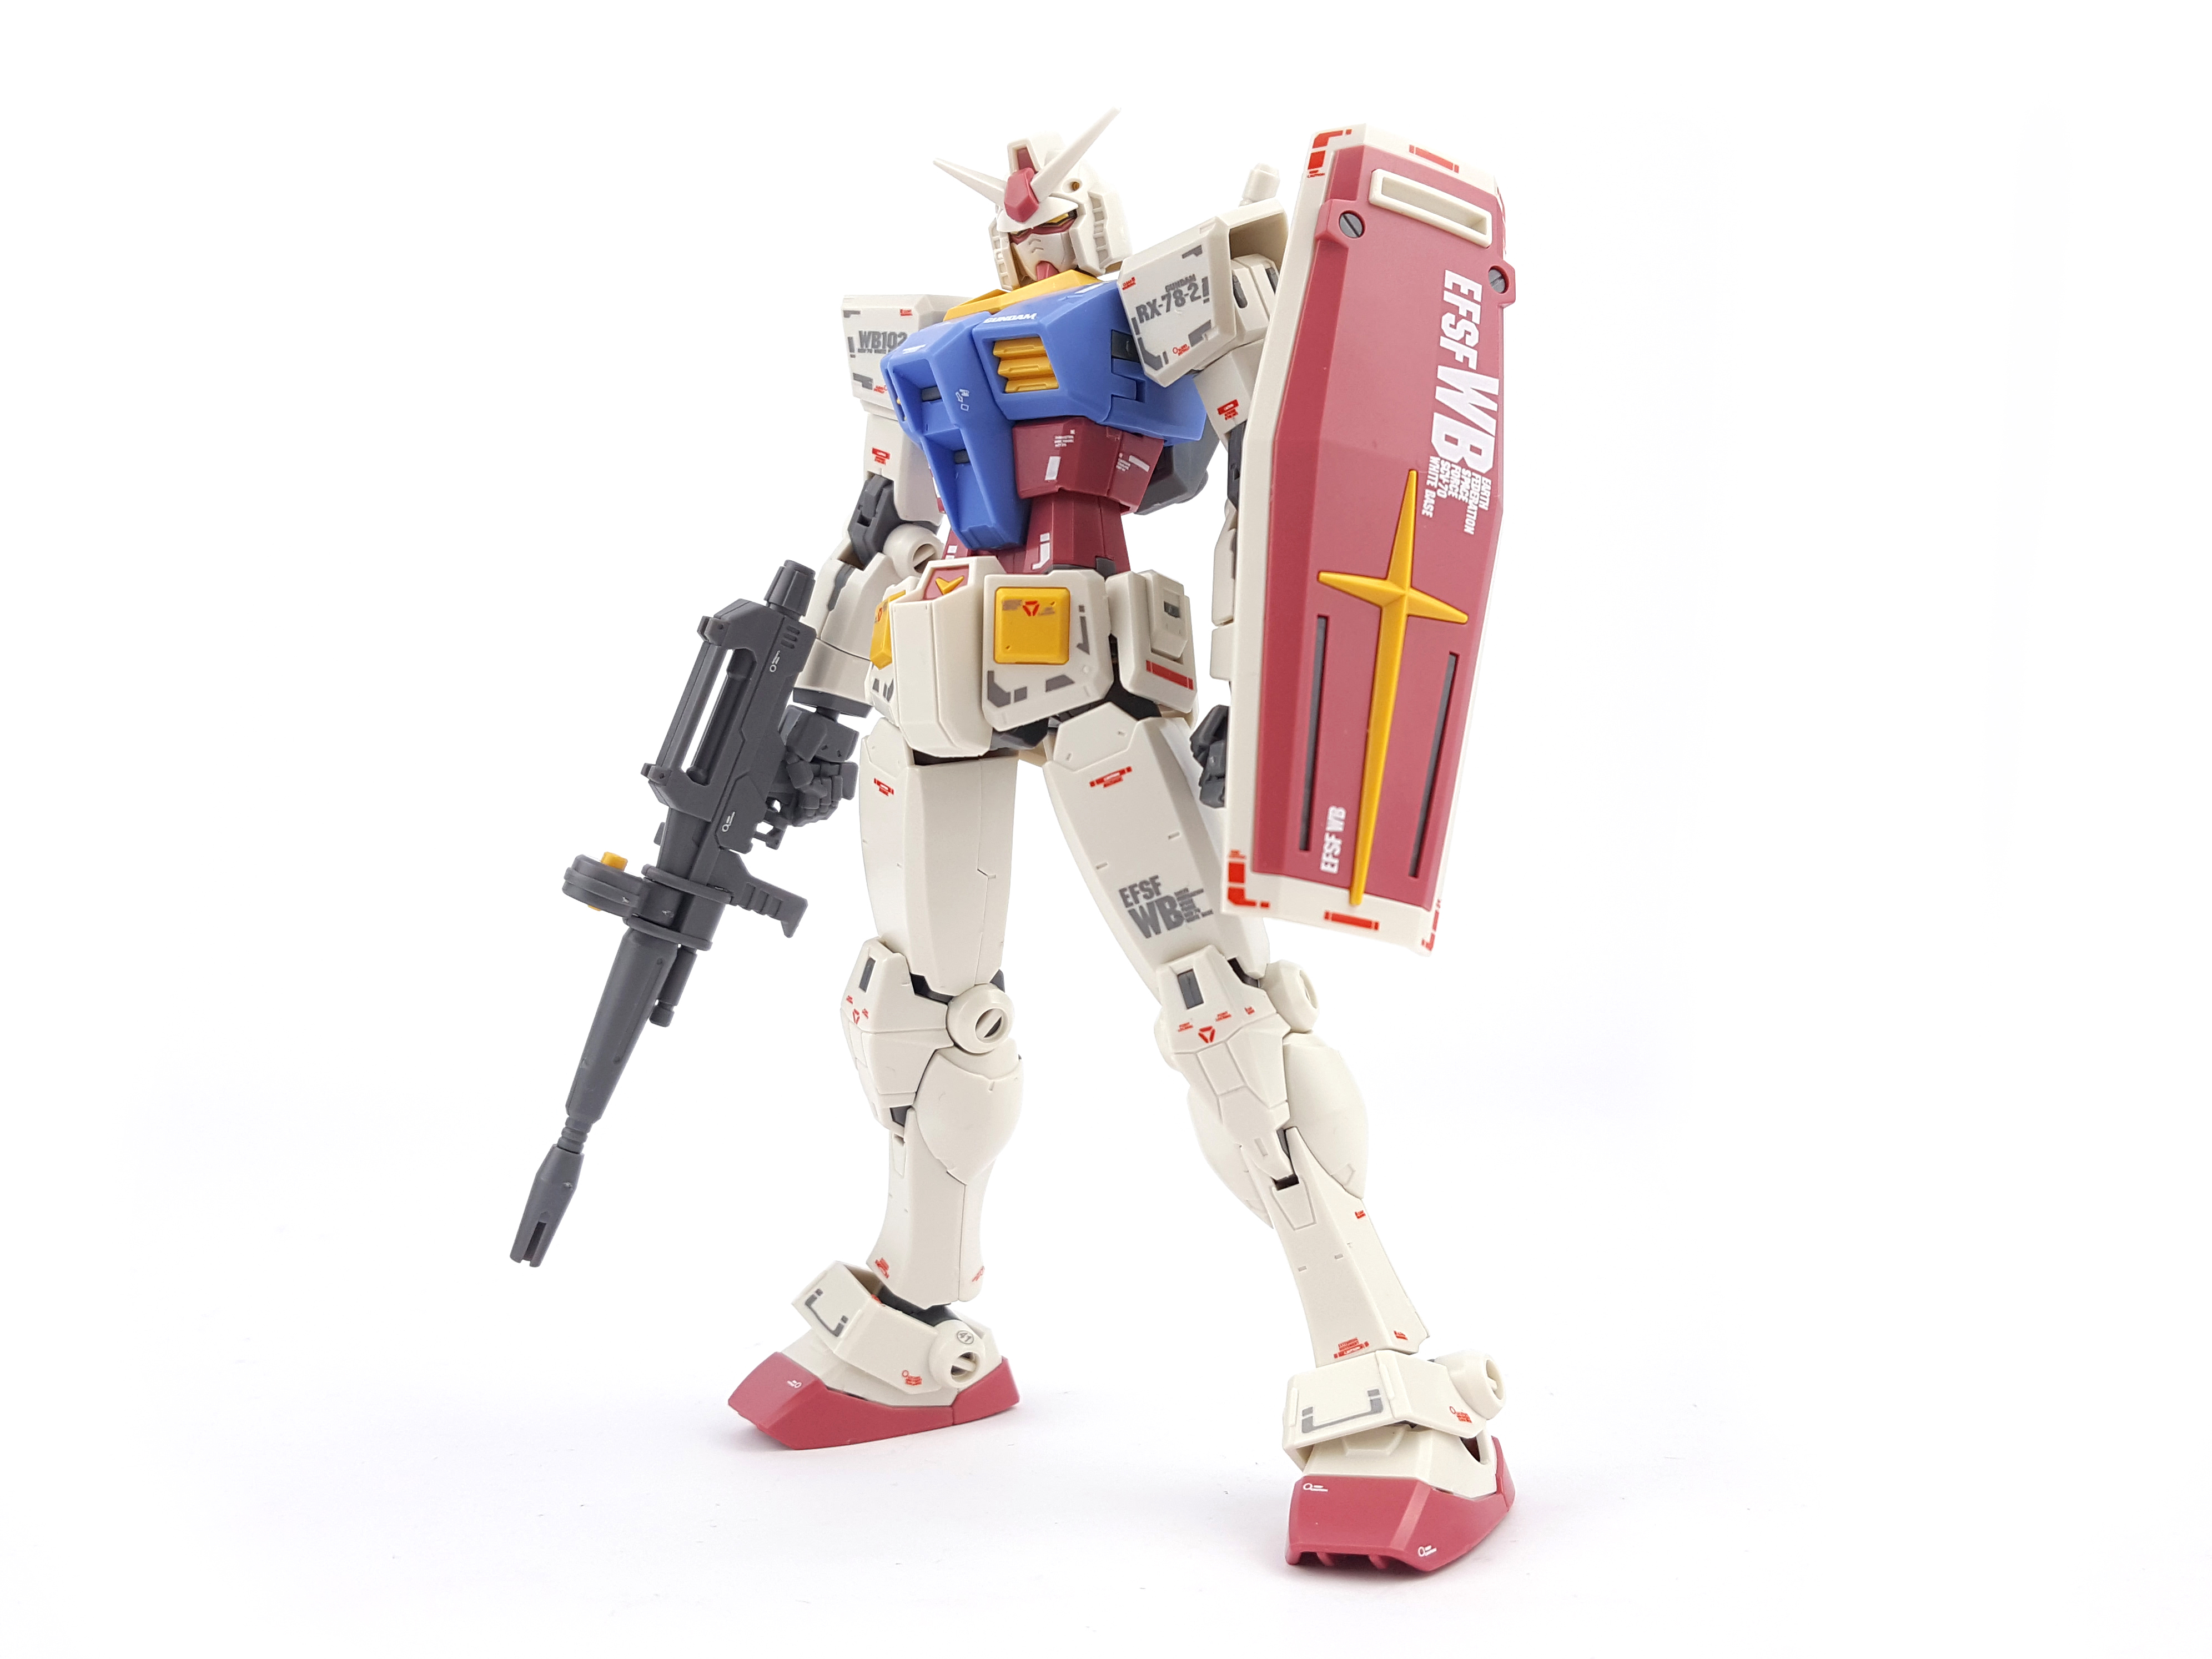 Precision Decals Detail Up Decals water decal For Bandai PG 1/60 RX-78-2 Gundam 